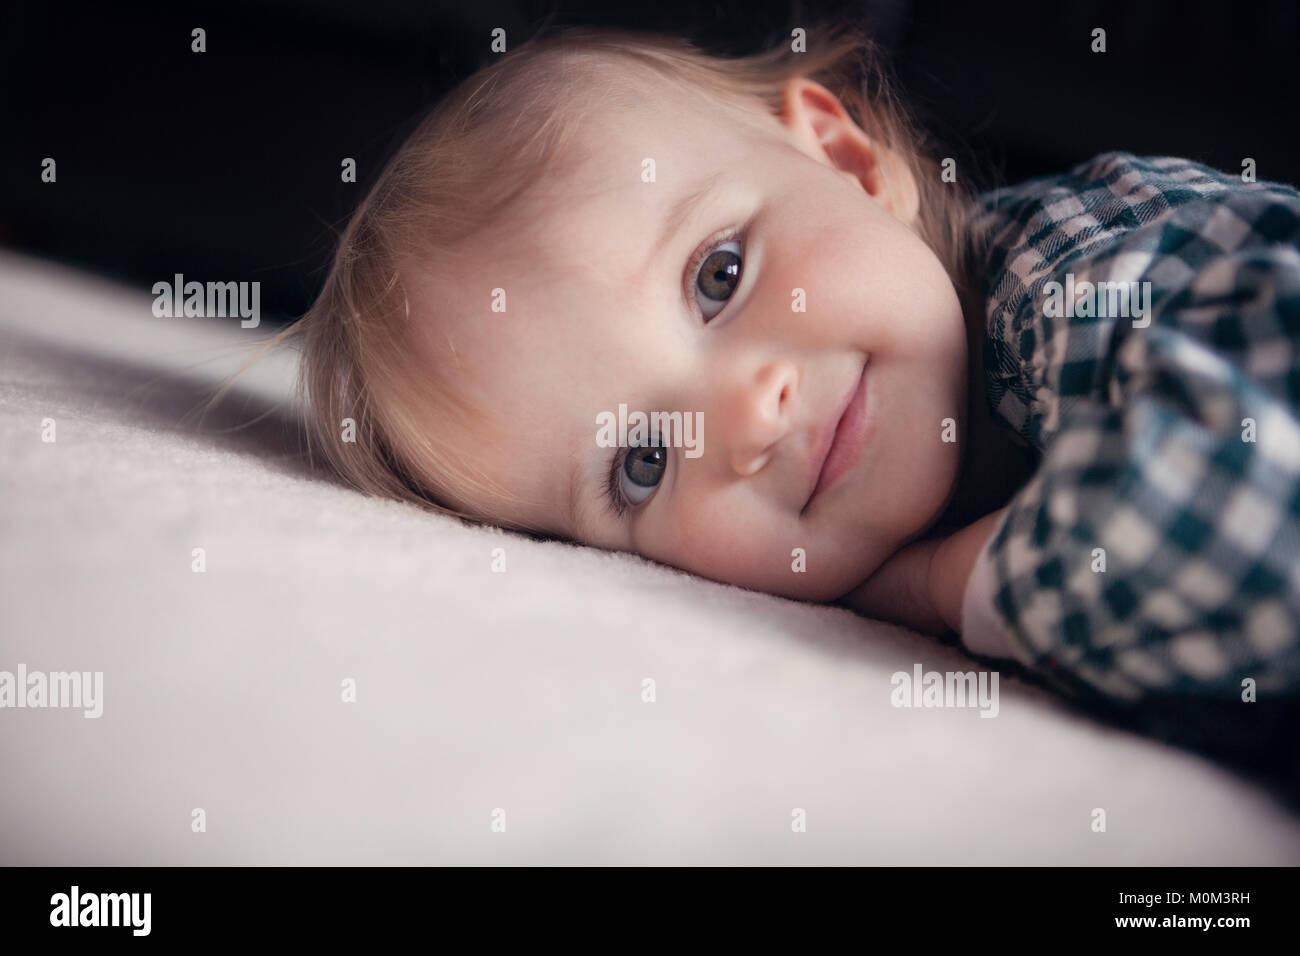 Toddler girl lying on the floor and looking at camera Stock Photo